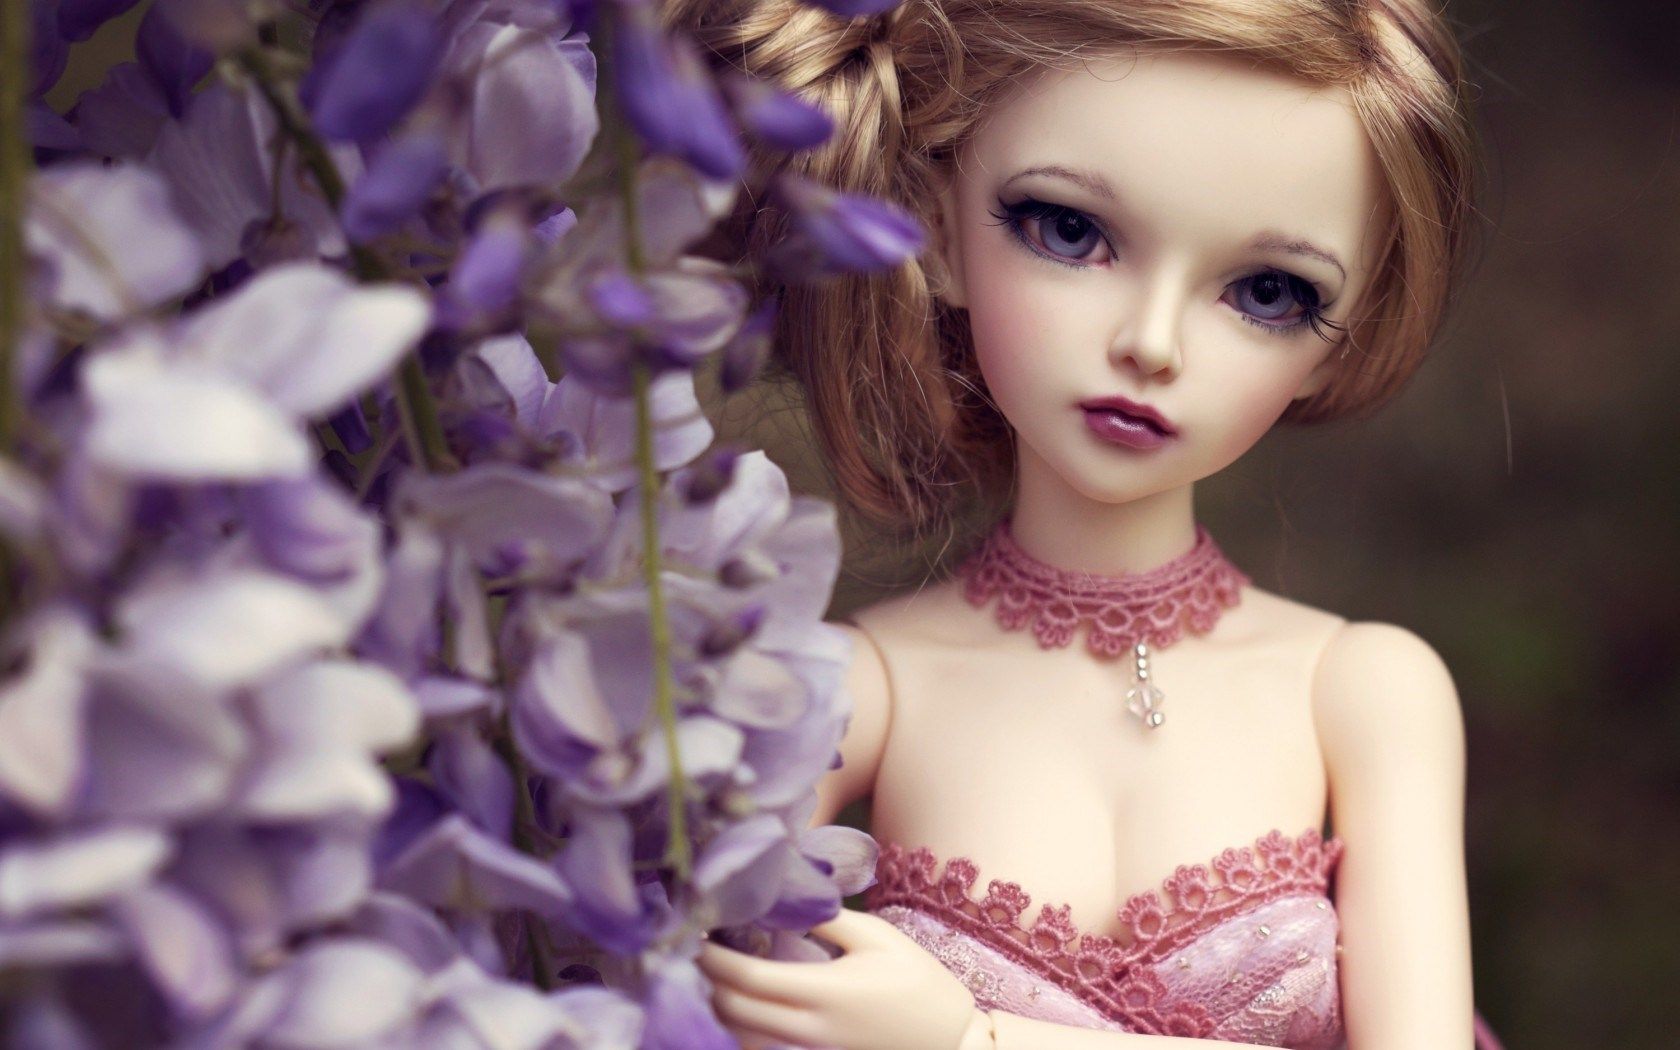 Doll Toy Blonde Girl Flowers Wisteria